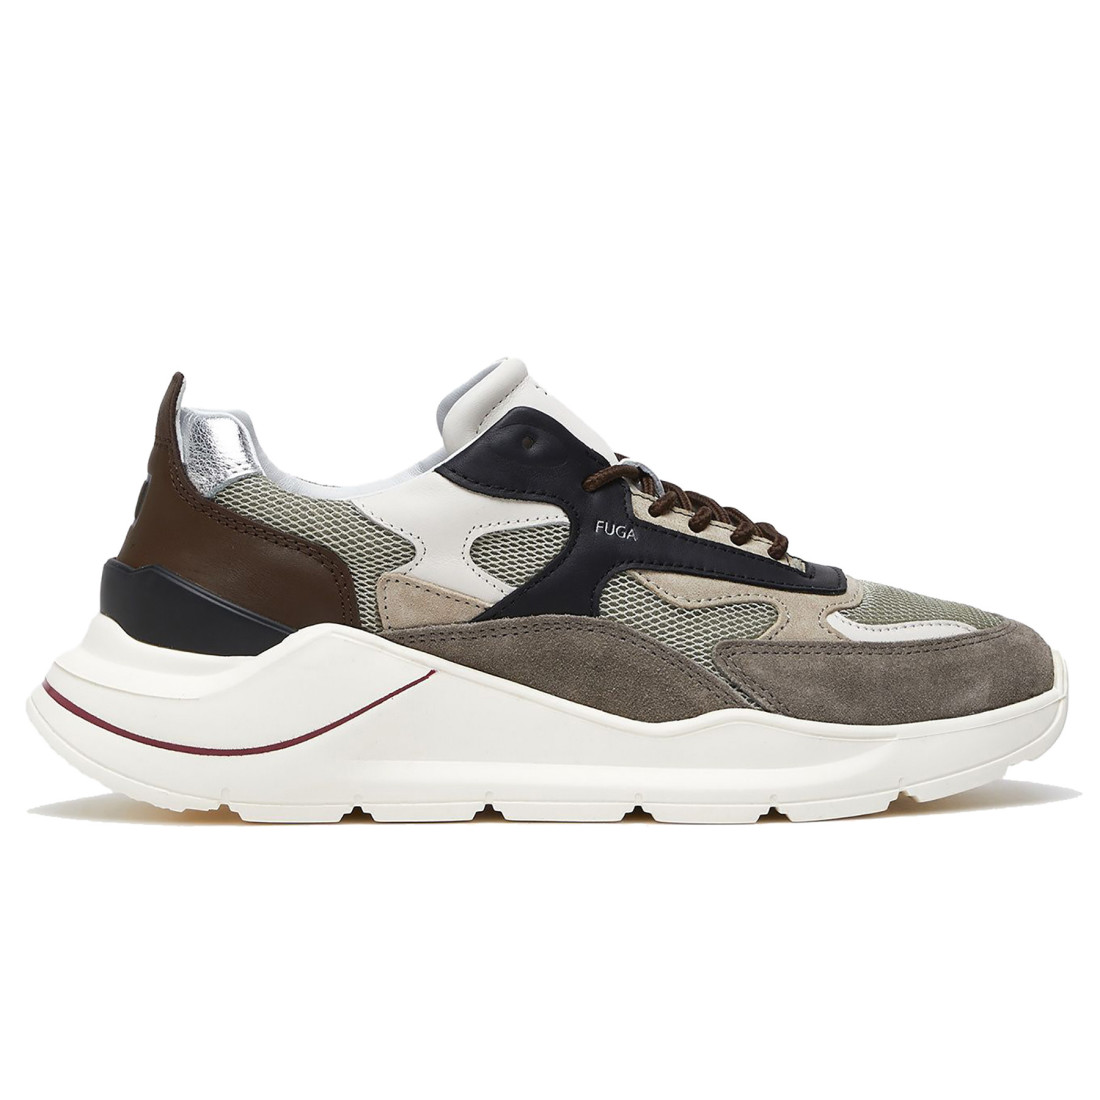 D.A.T.E. Fuga grey, brown and blue sneakers in suede and fabric